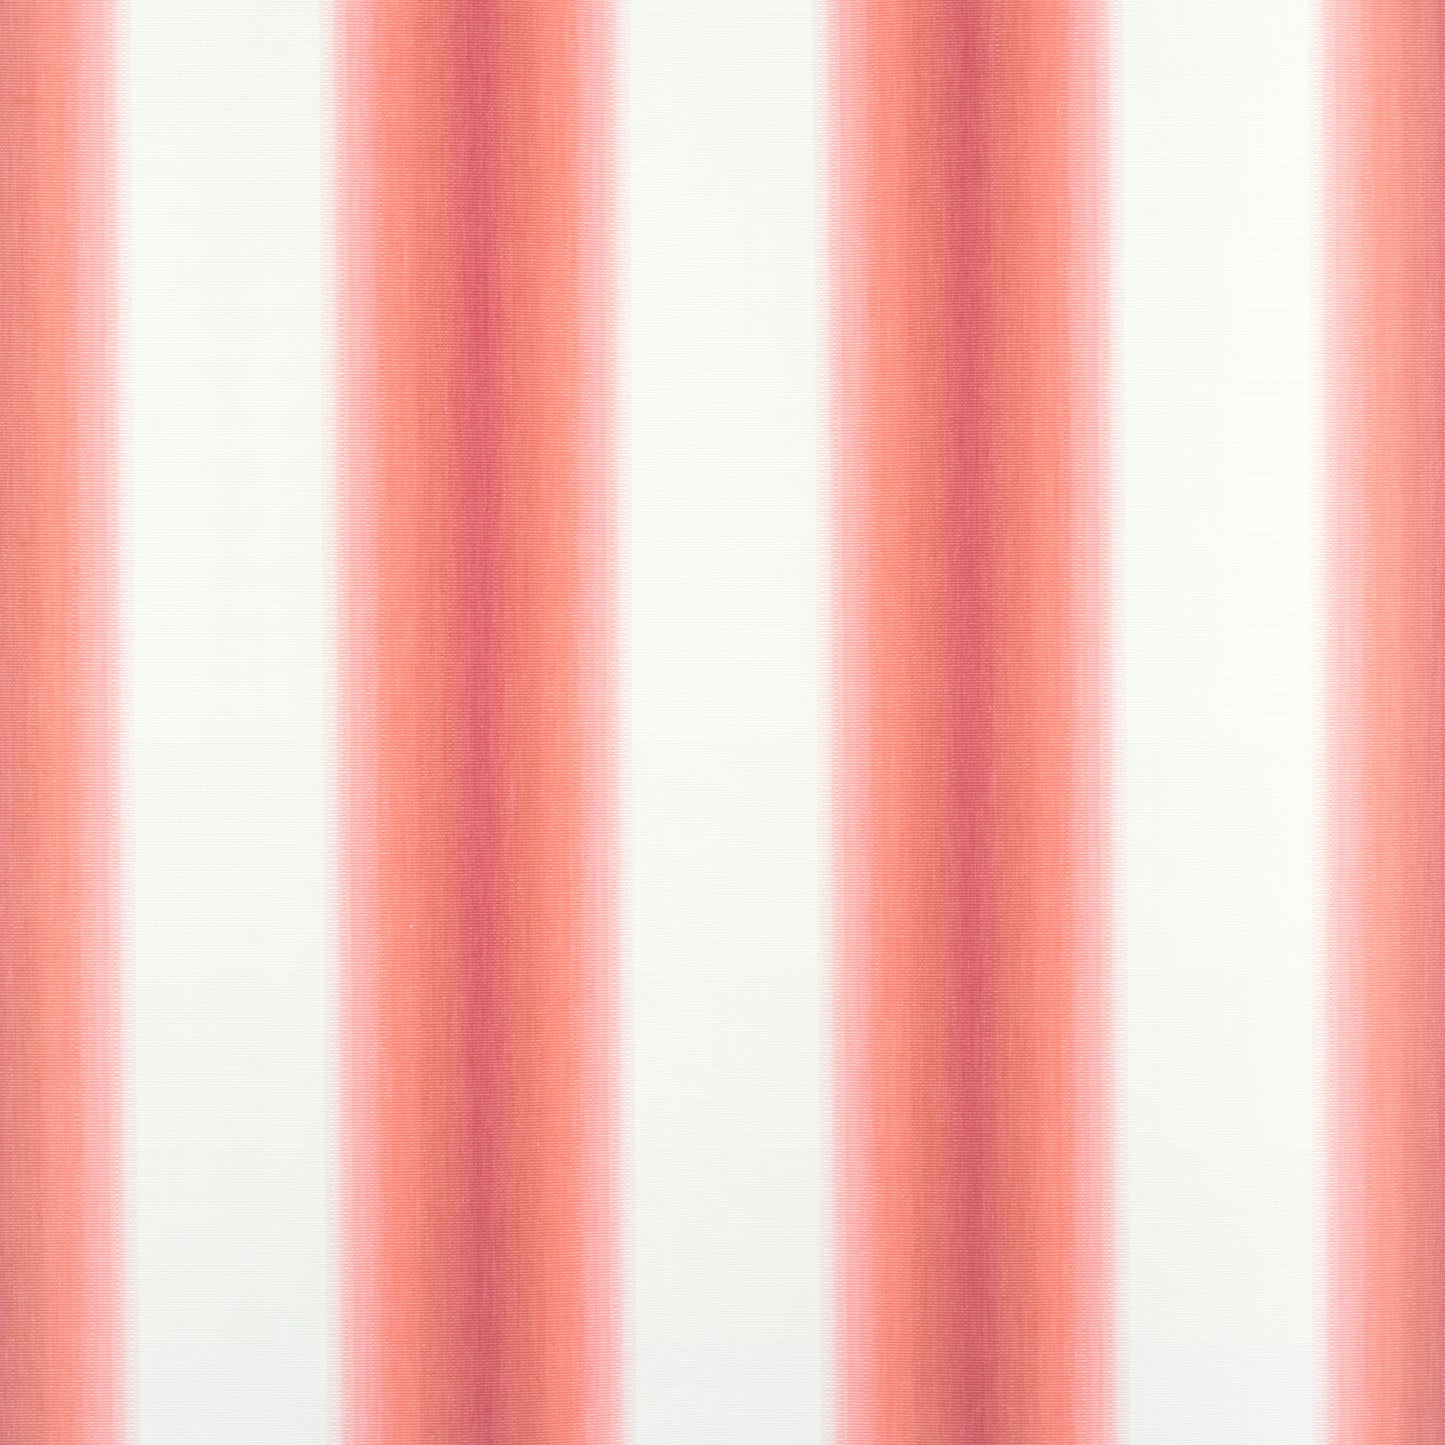 Purchase Thibaut Fabric Item# W775503 pattern name Stockton Stripe color Coral